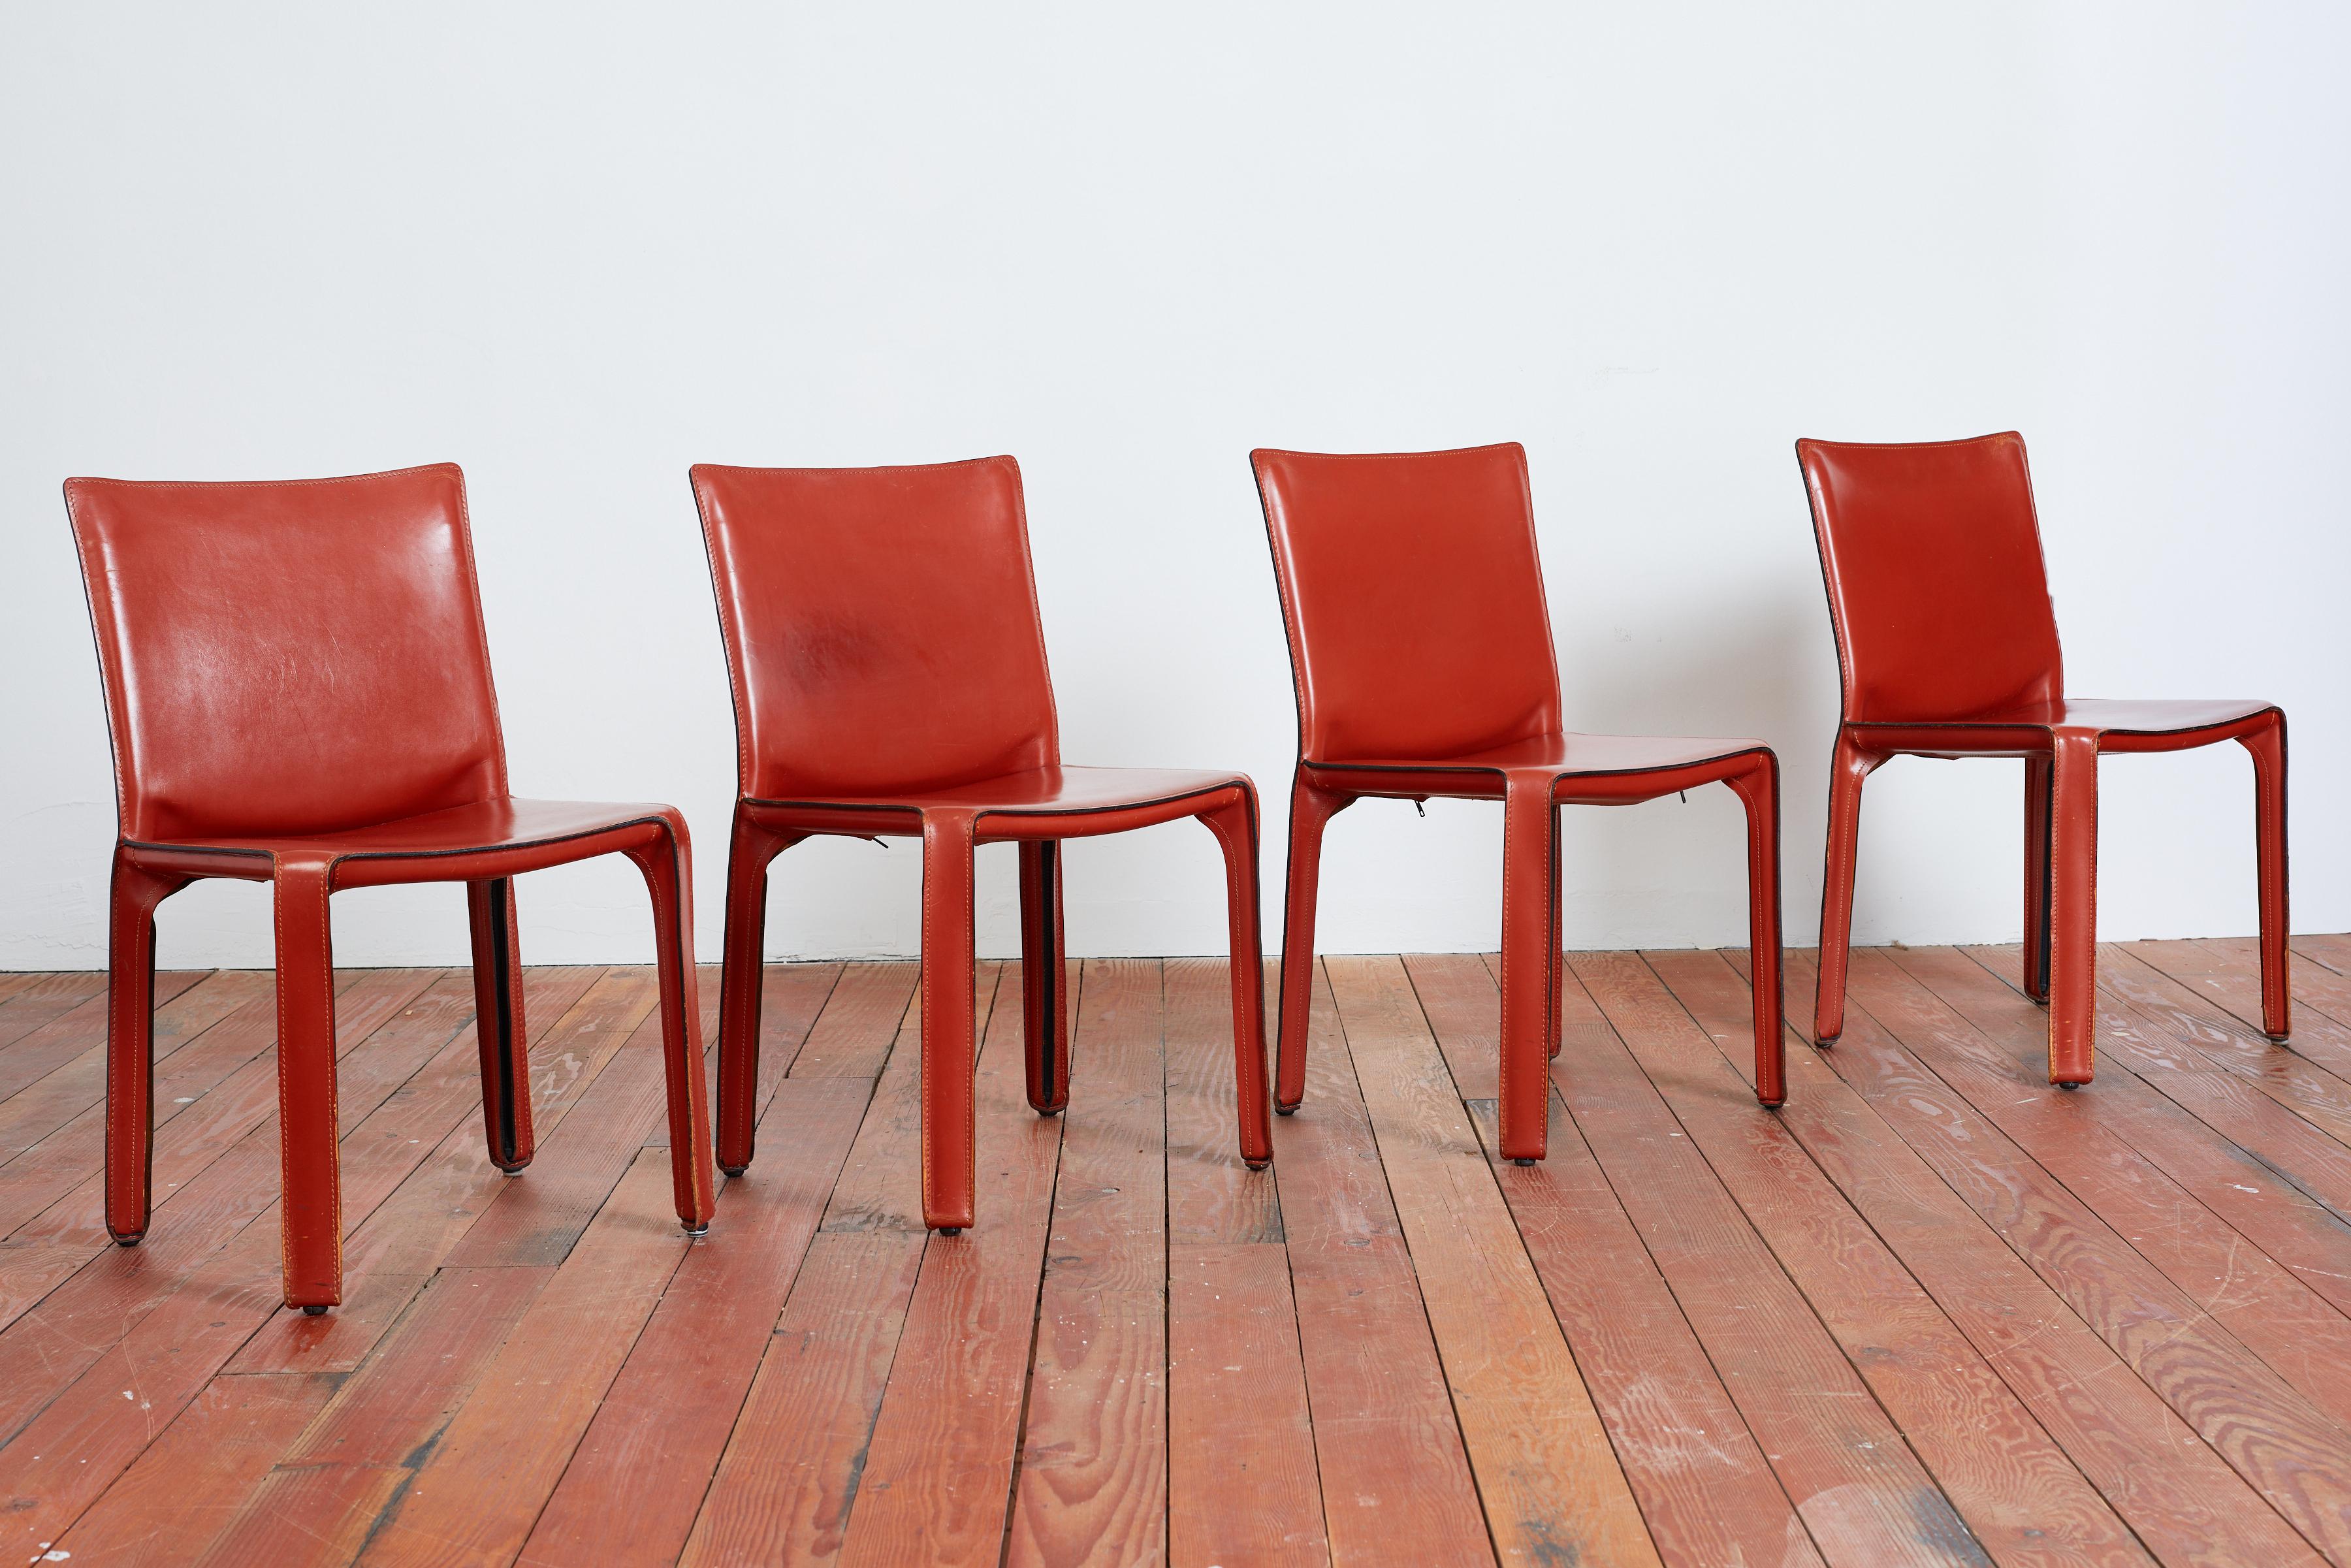 Classic leather cab chairs by Mario Bellini for Cassina in cognac reddish leather. 
Wonderful patina. 
Set of four available. Priced individually.
